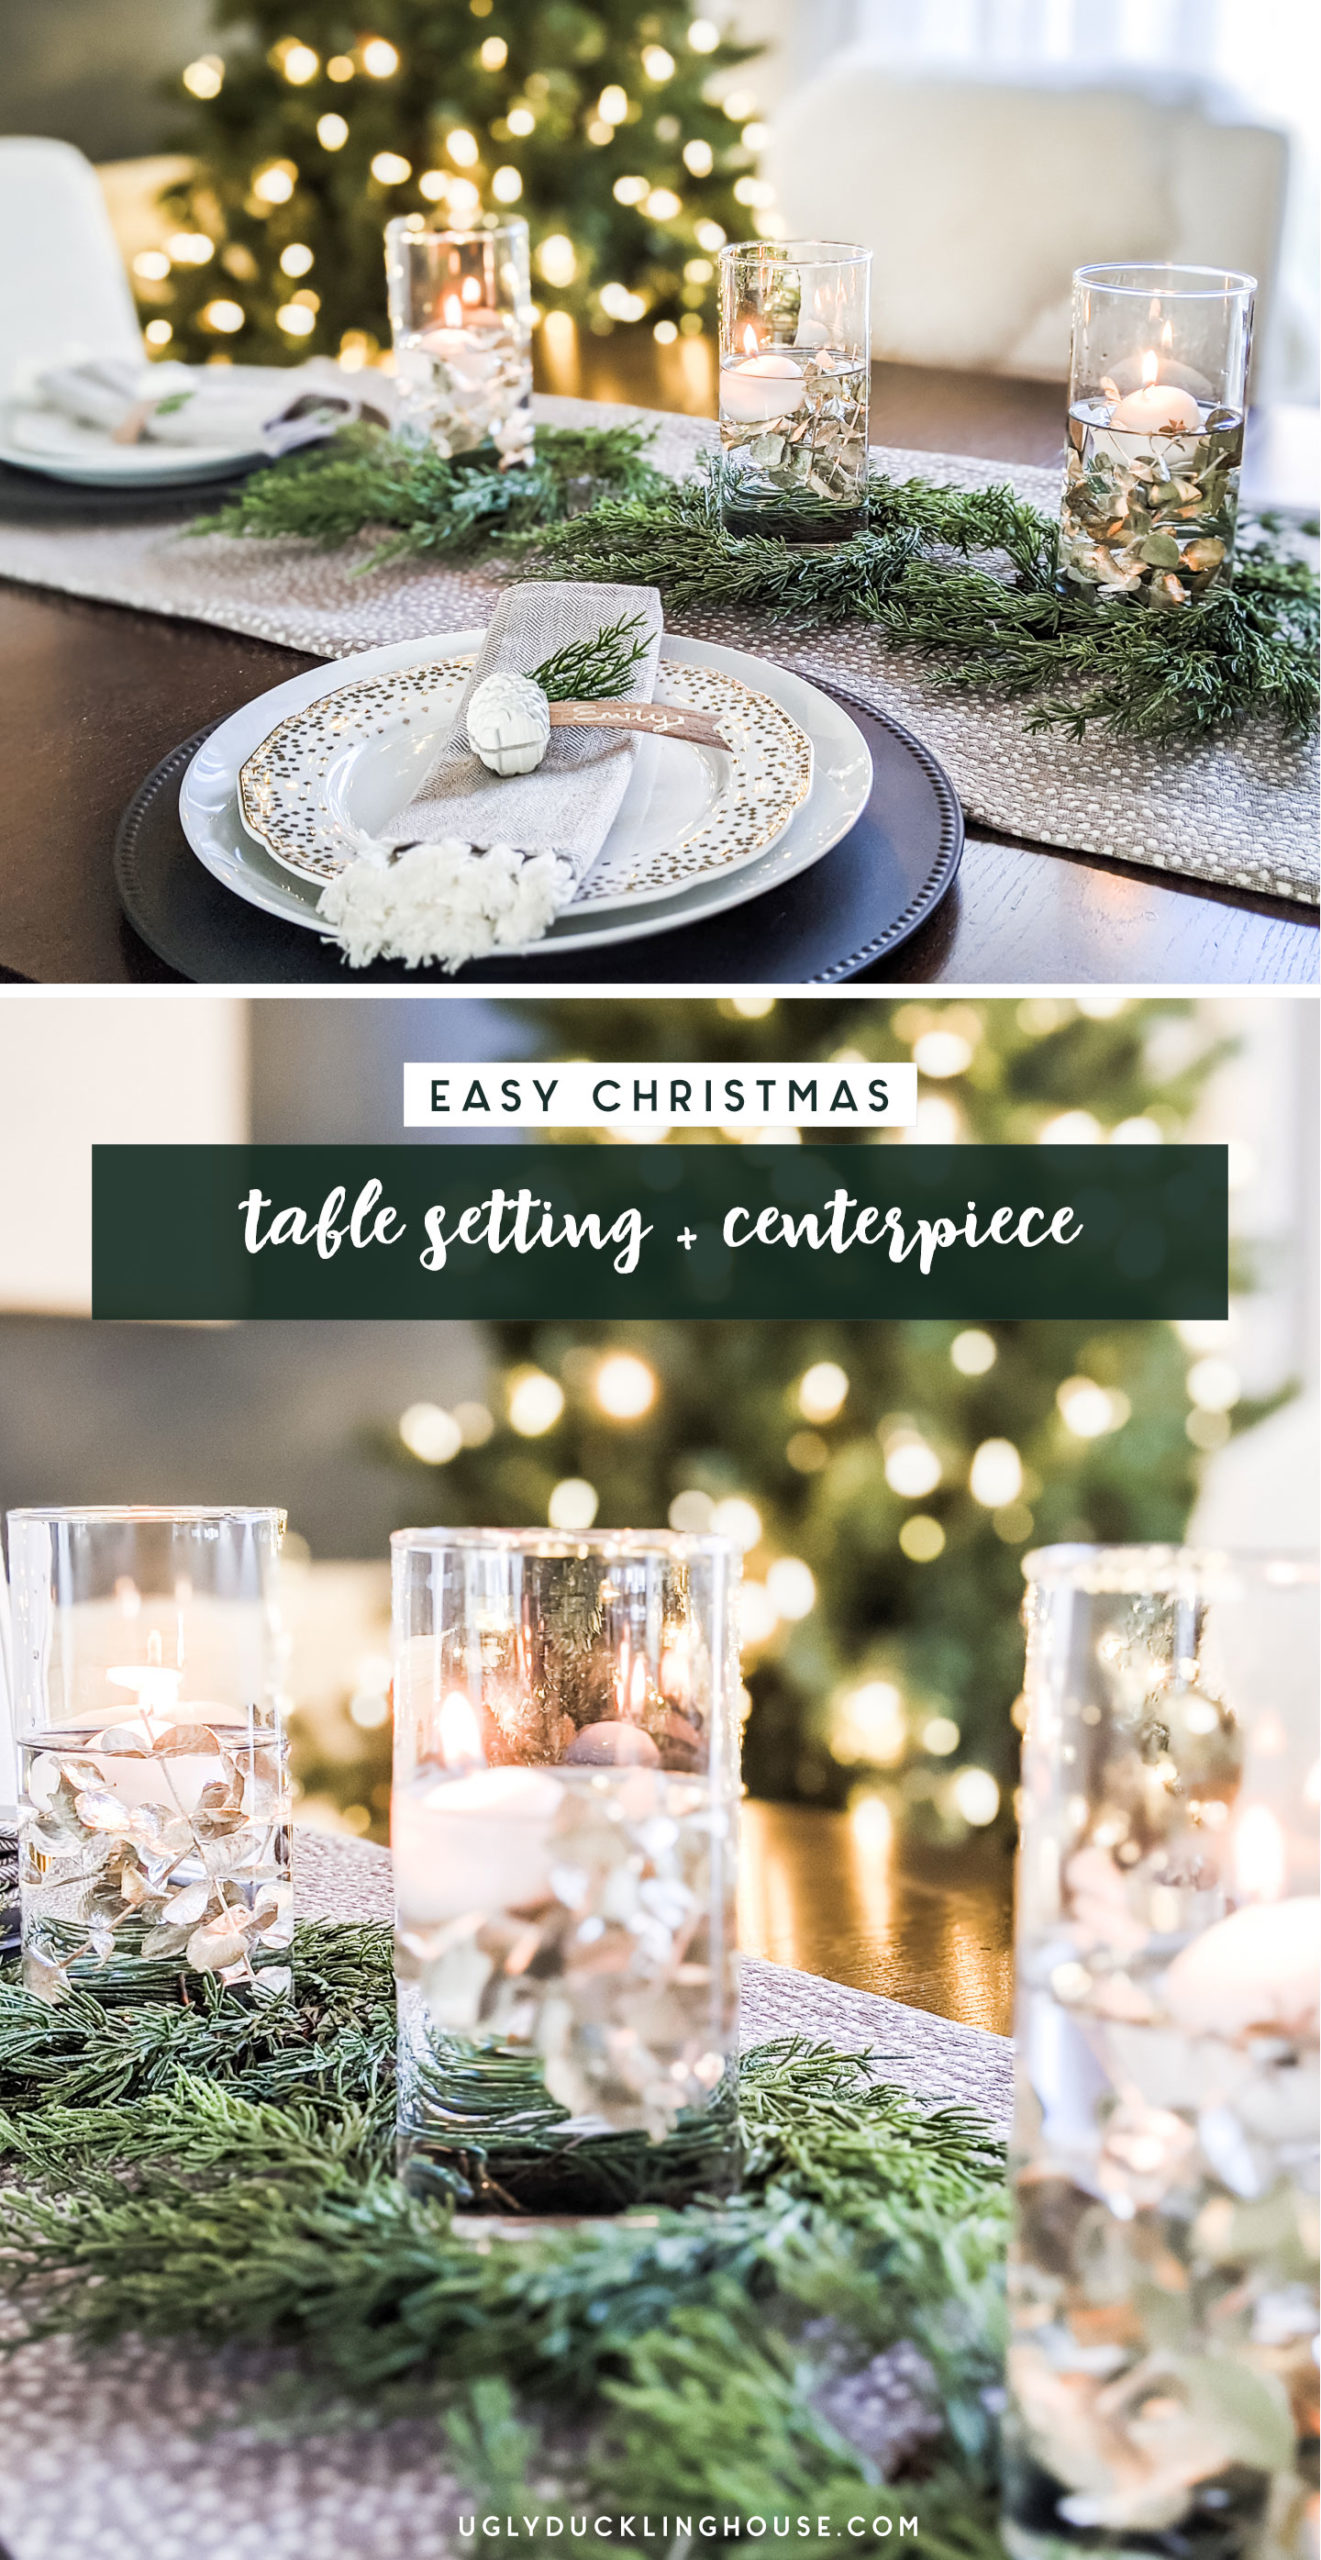 55+ DIY Christmas Table Decorations and Holiday Centerpieces